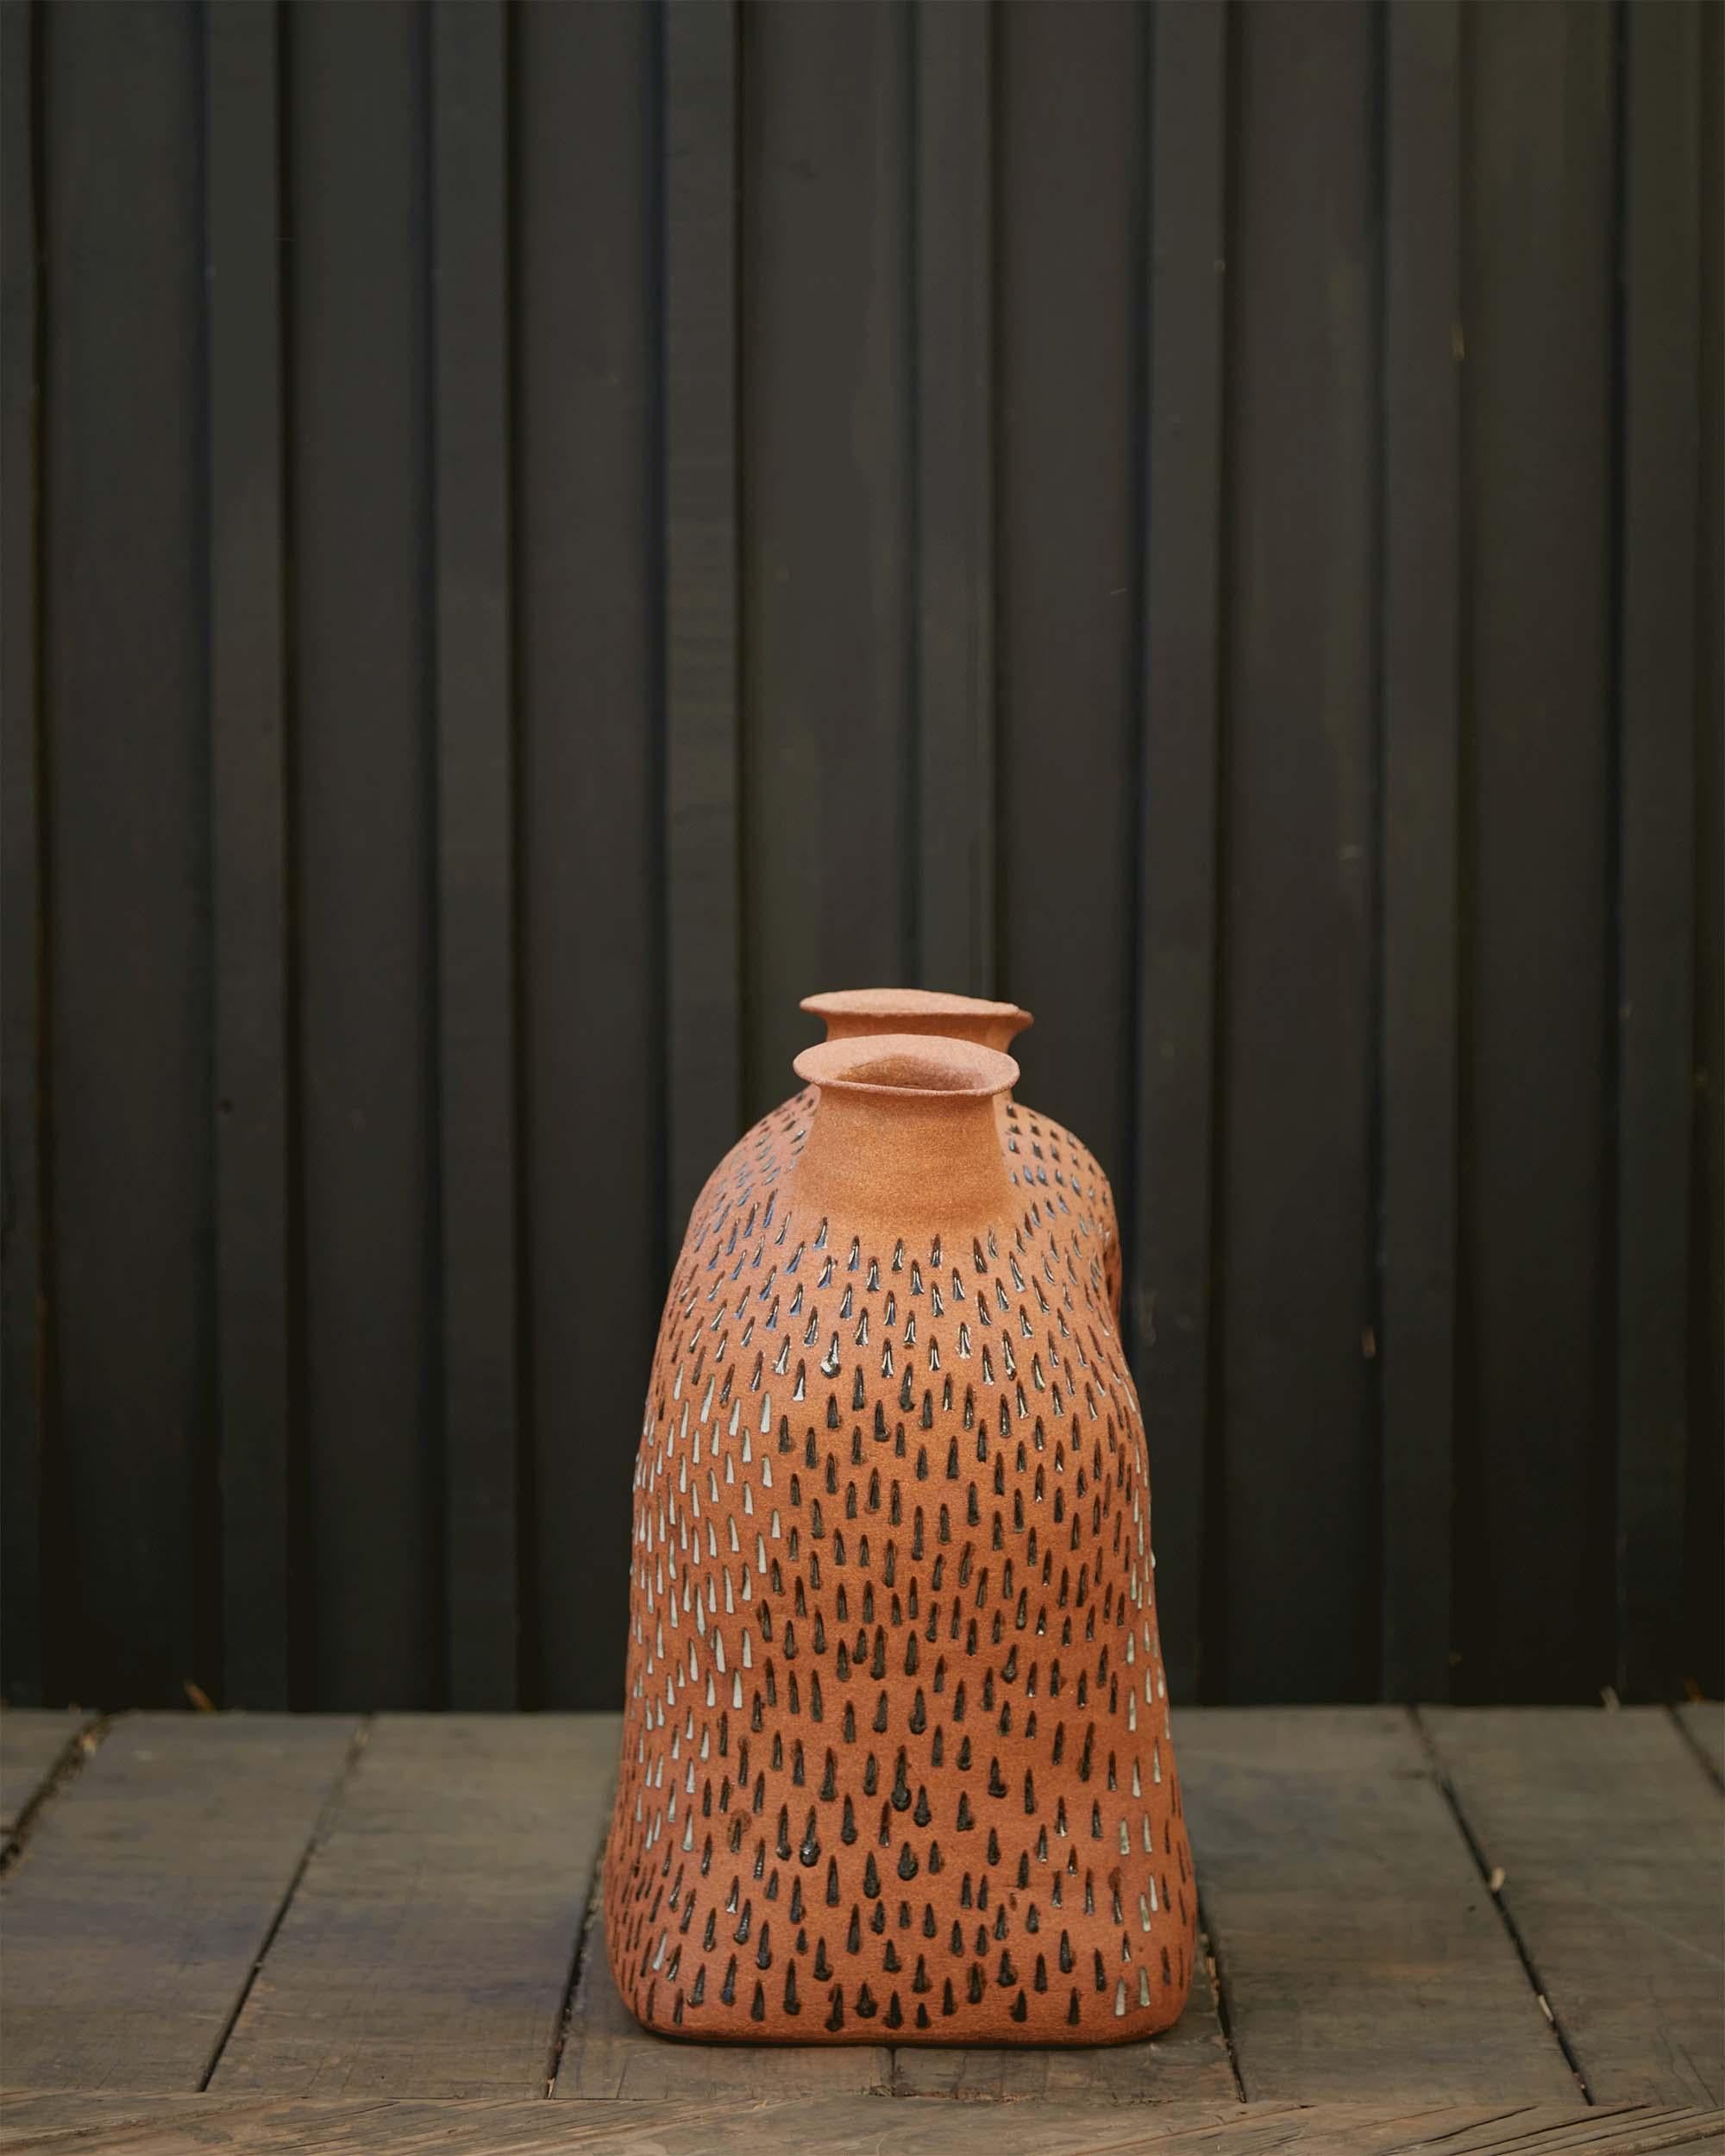 AW12 Vessel by Ceramic Artist Addison Woolsey For Sale 1